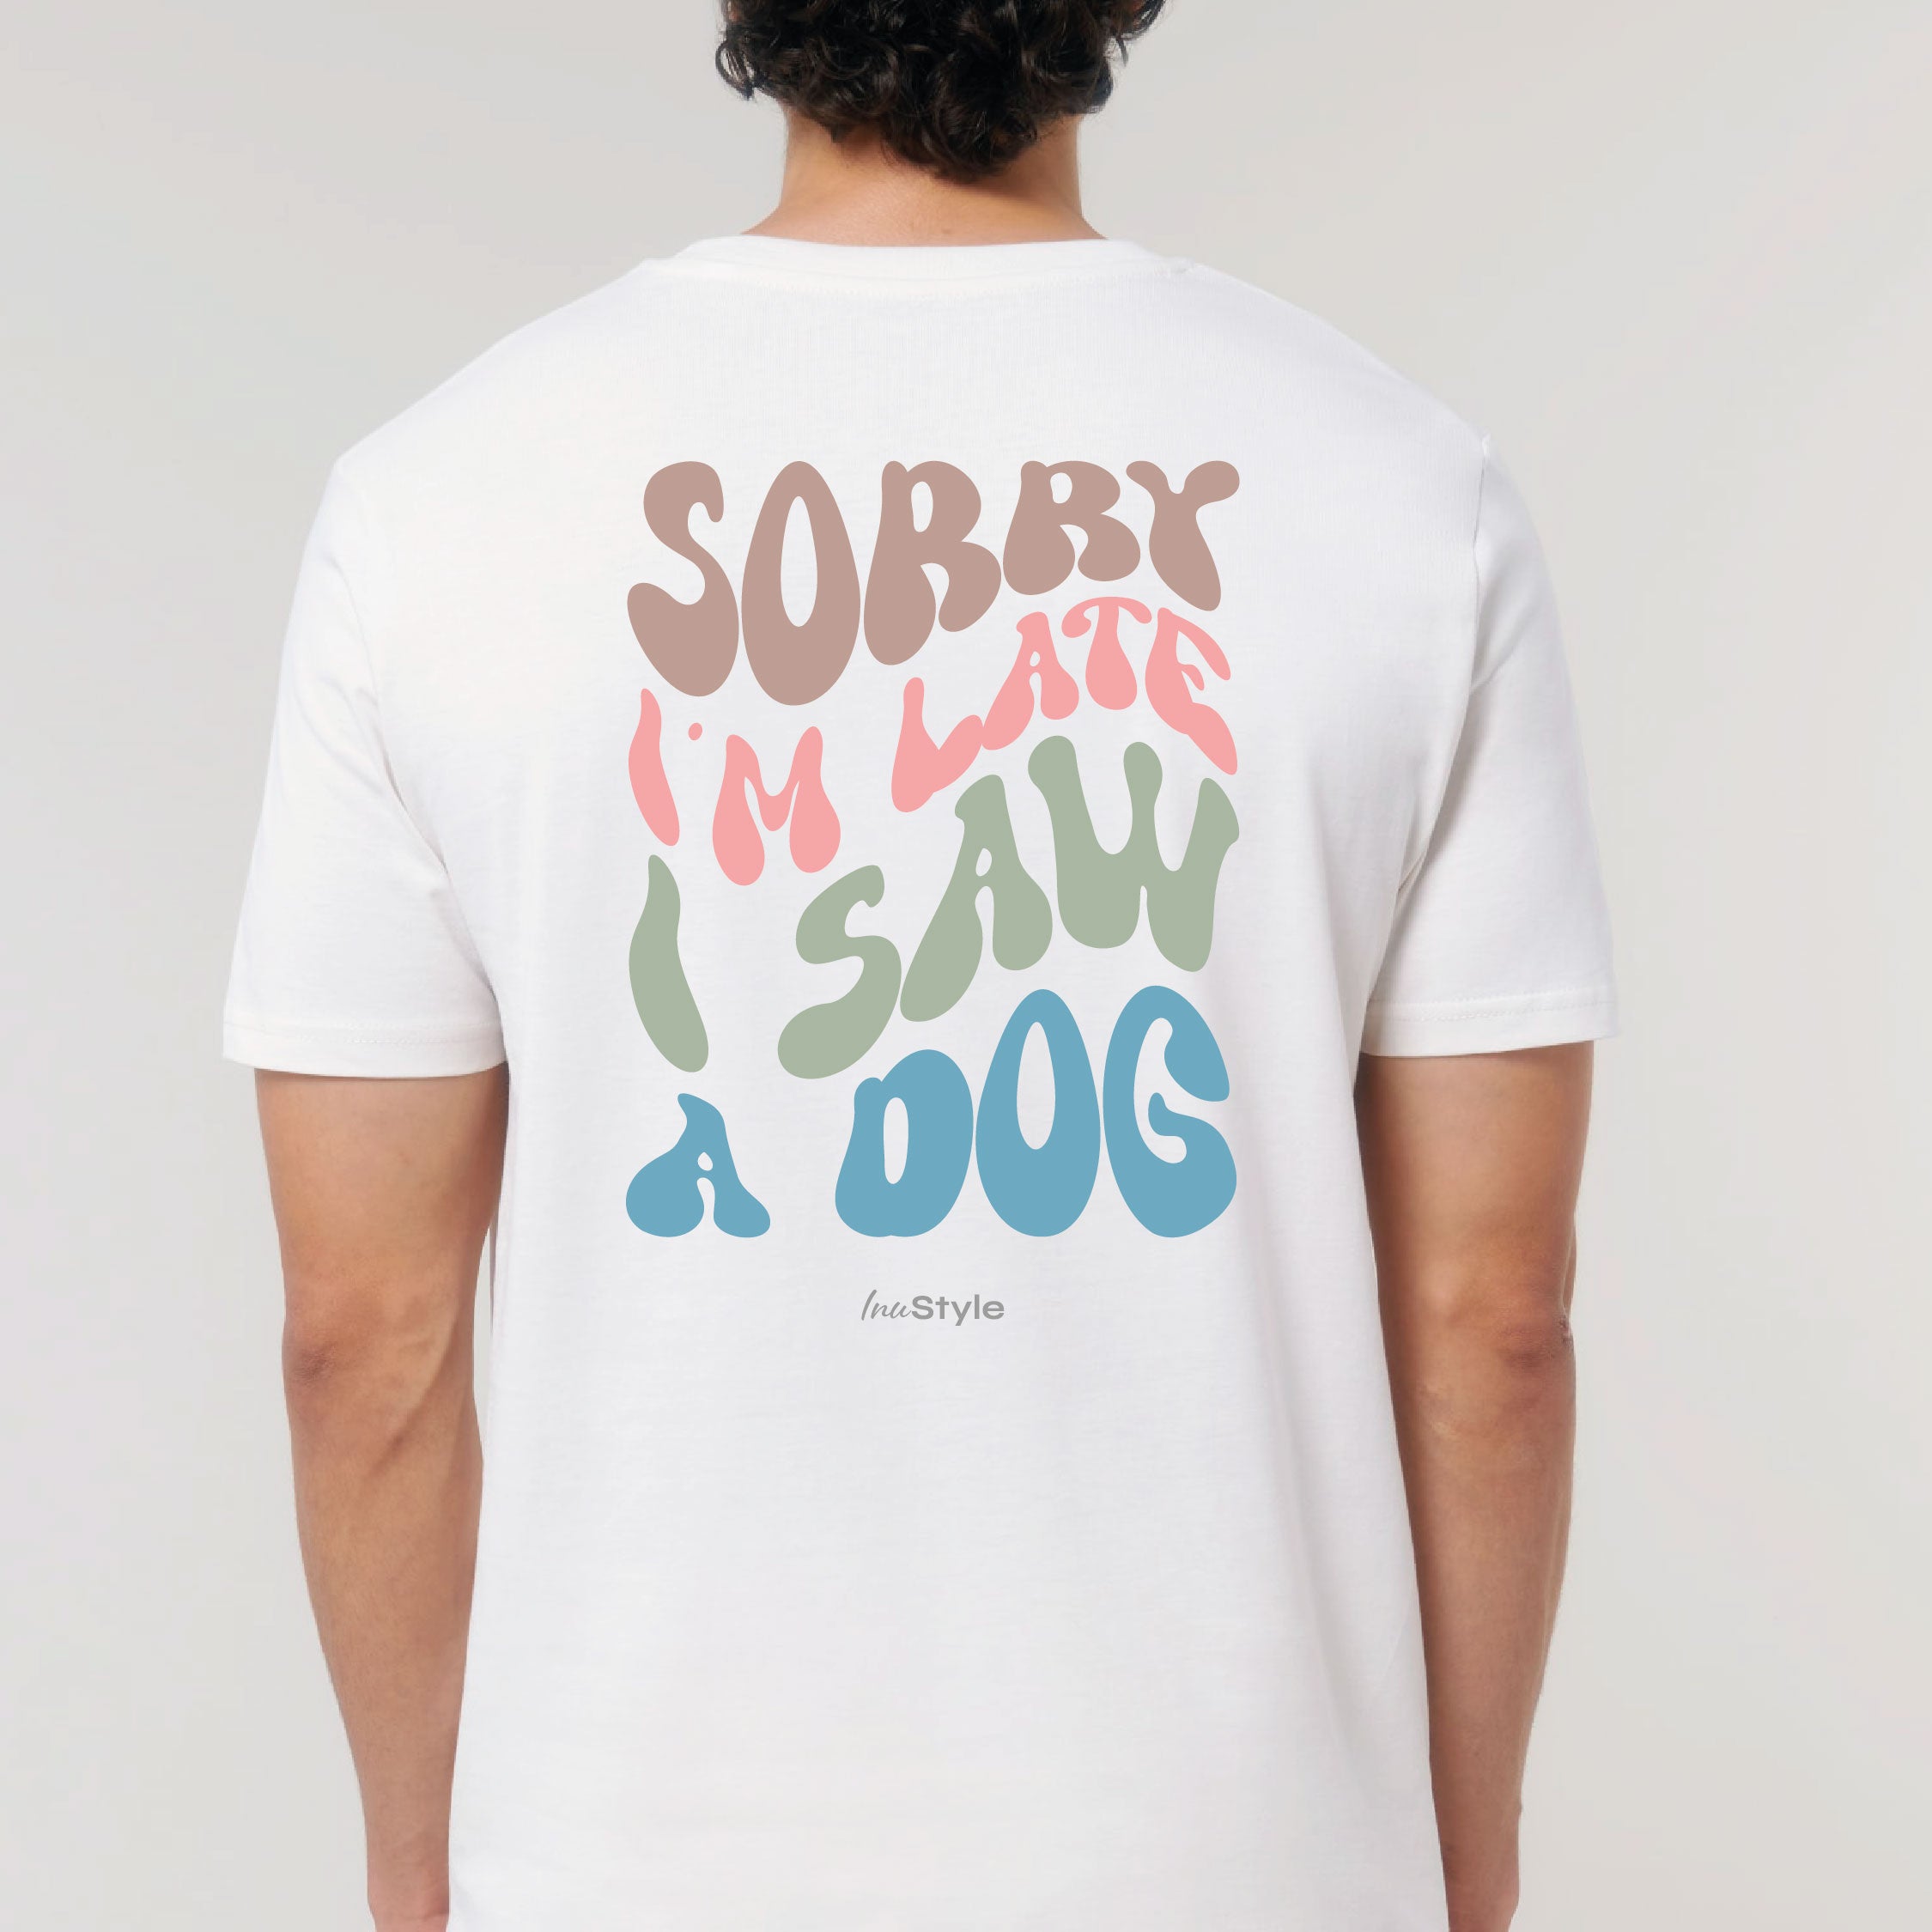 New Inu.style Collection - Sorry I am late. I saw a DOG - Shirt